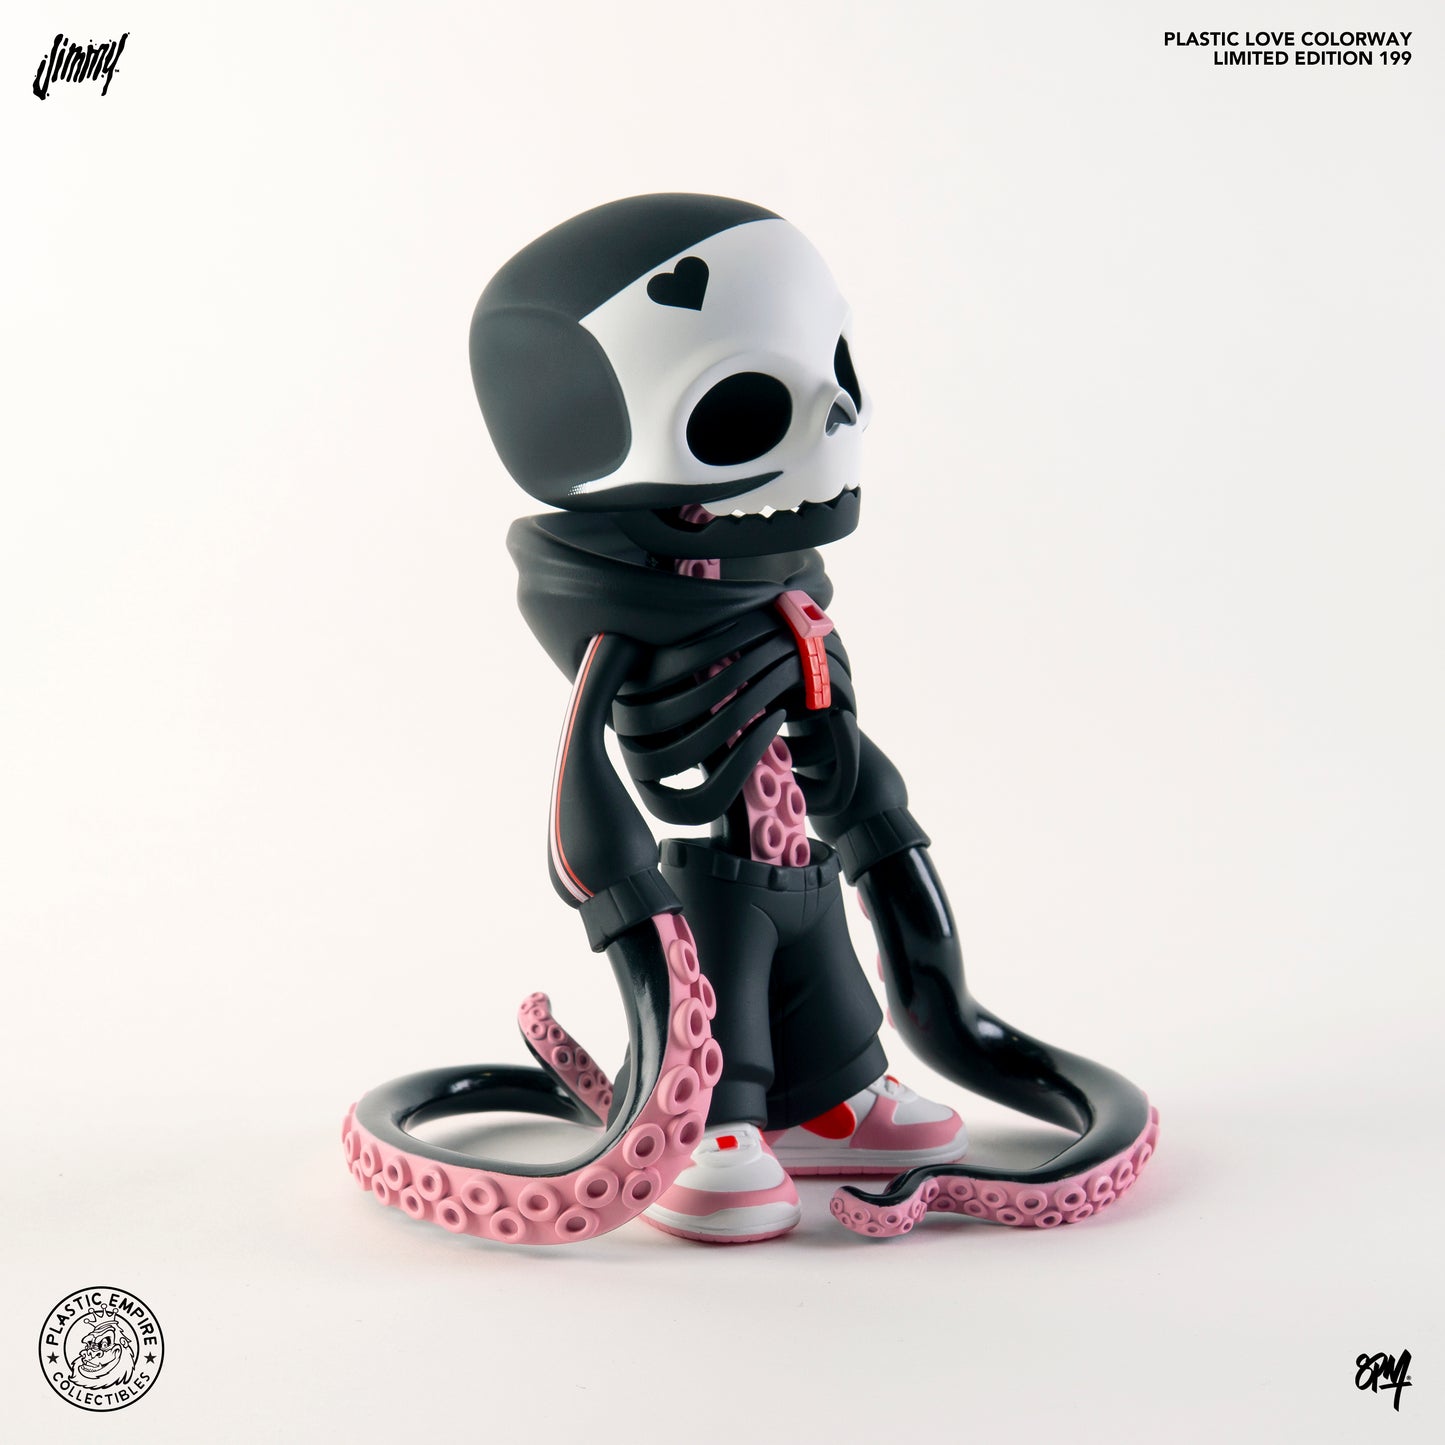 Jimmy Vinyl 8" Love Colorway By 8PM Plastic Empire Megacon Exclusive figure in stock